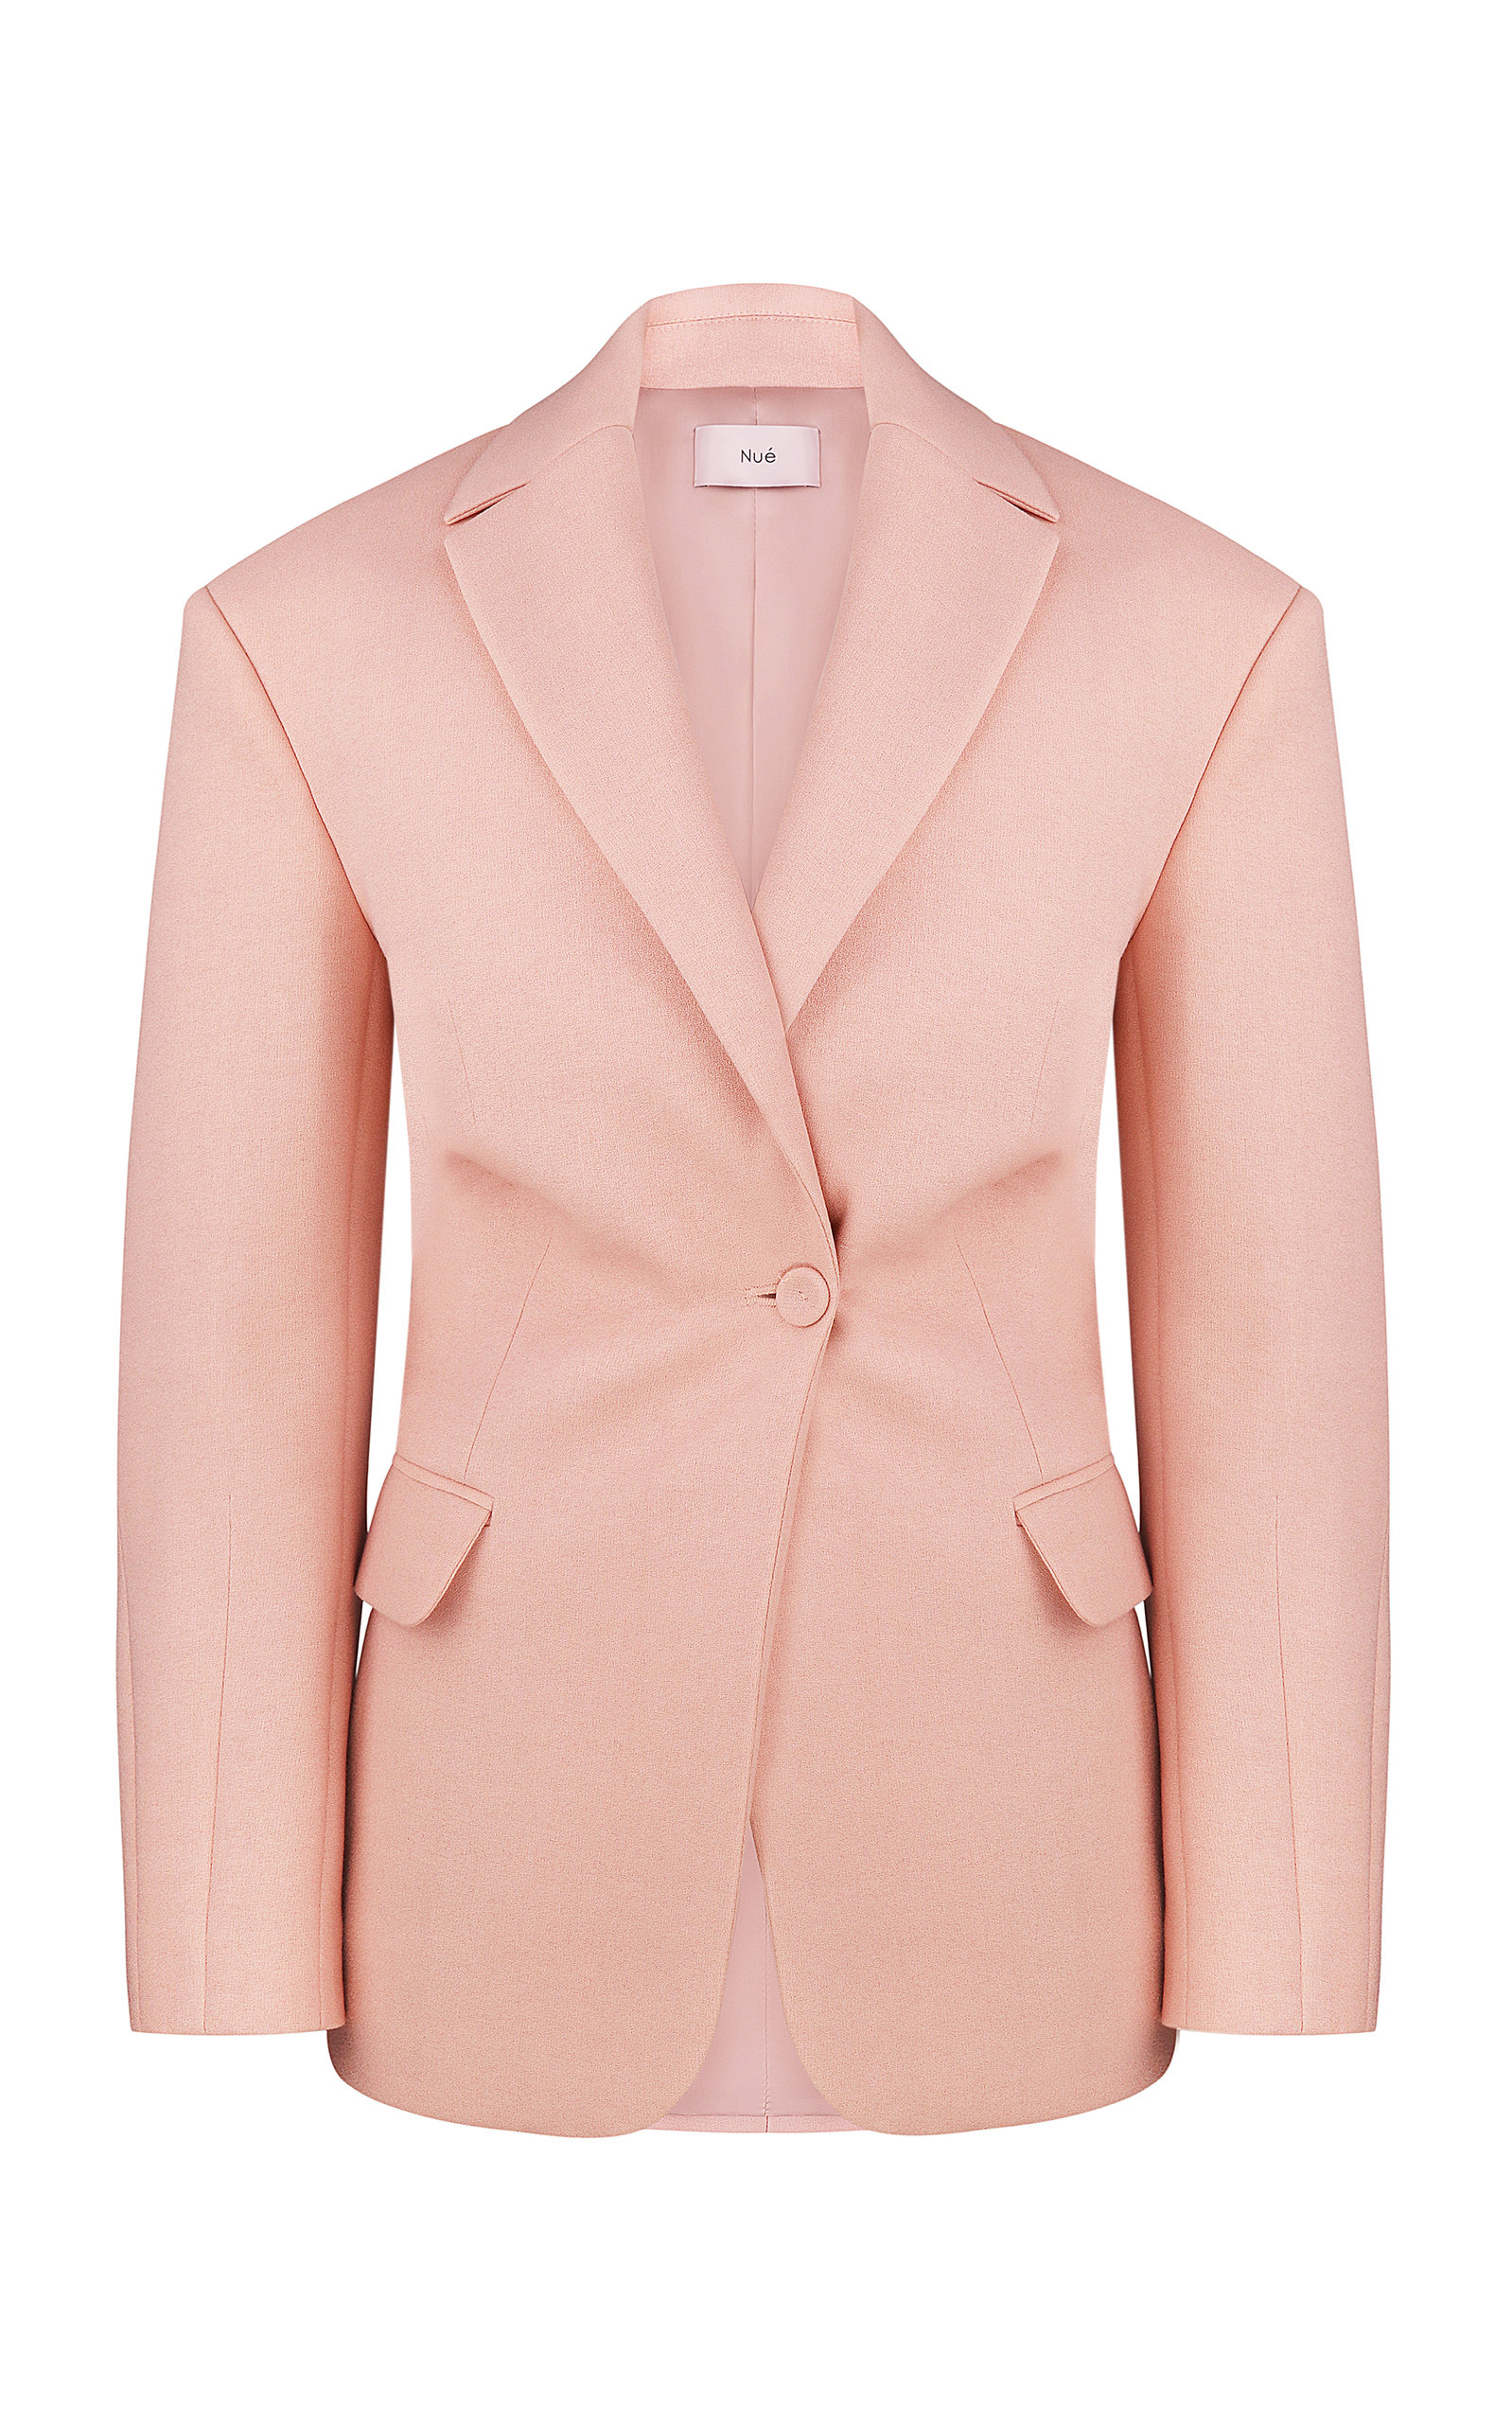 Nué Seashell Tailored Crepe Blazer Jacket In Pink